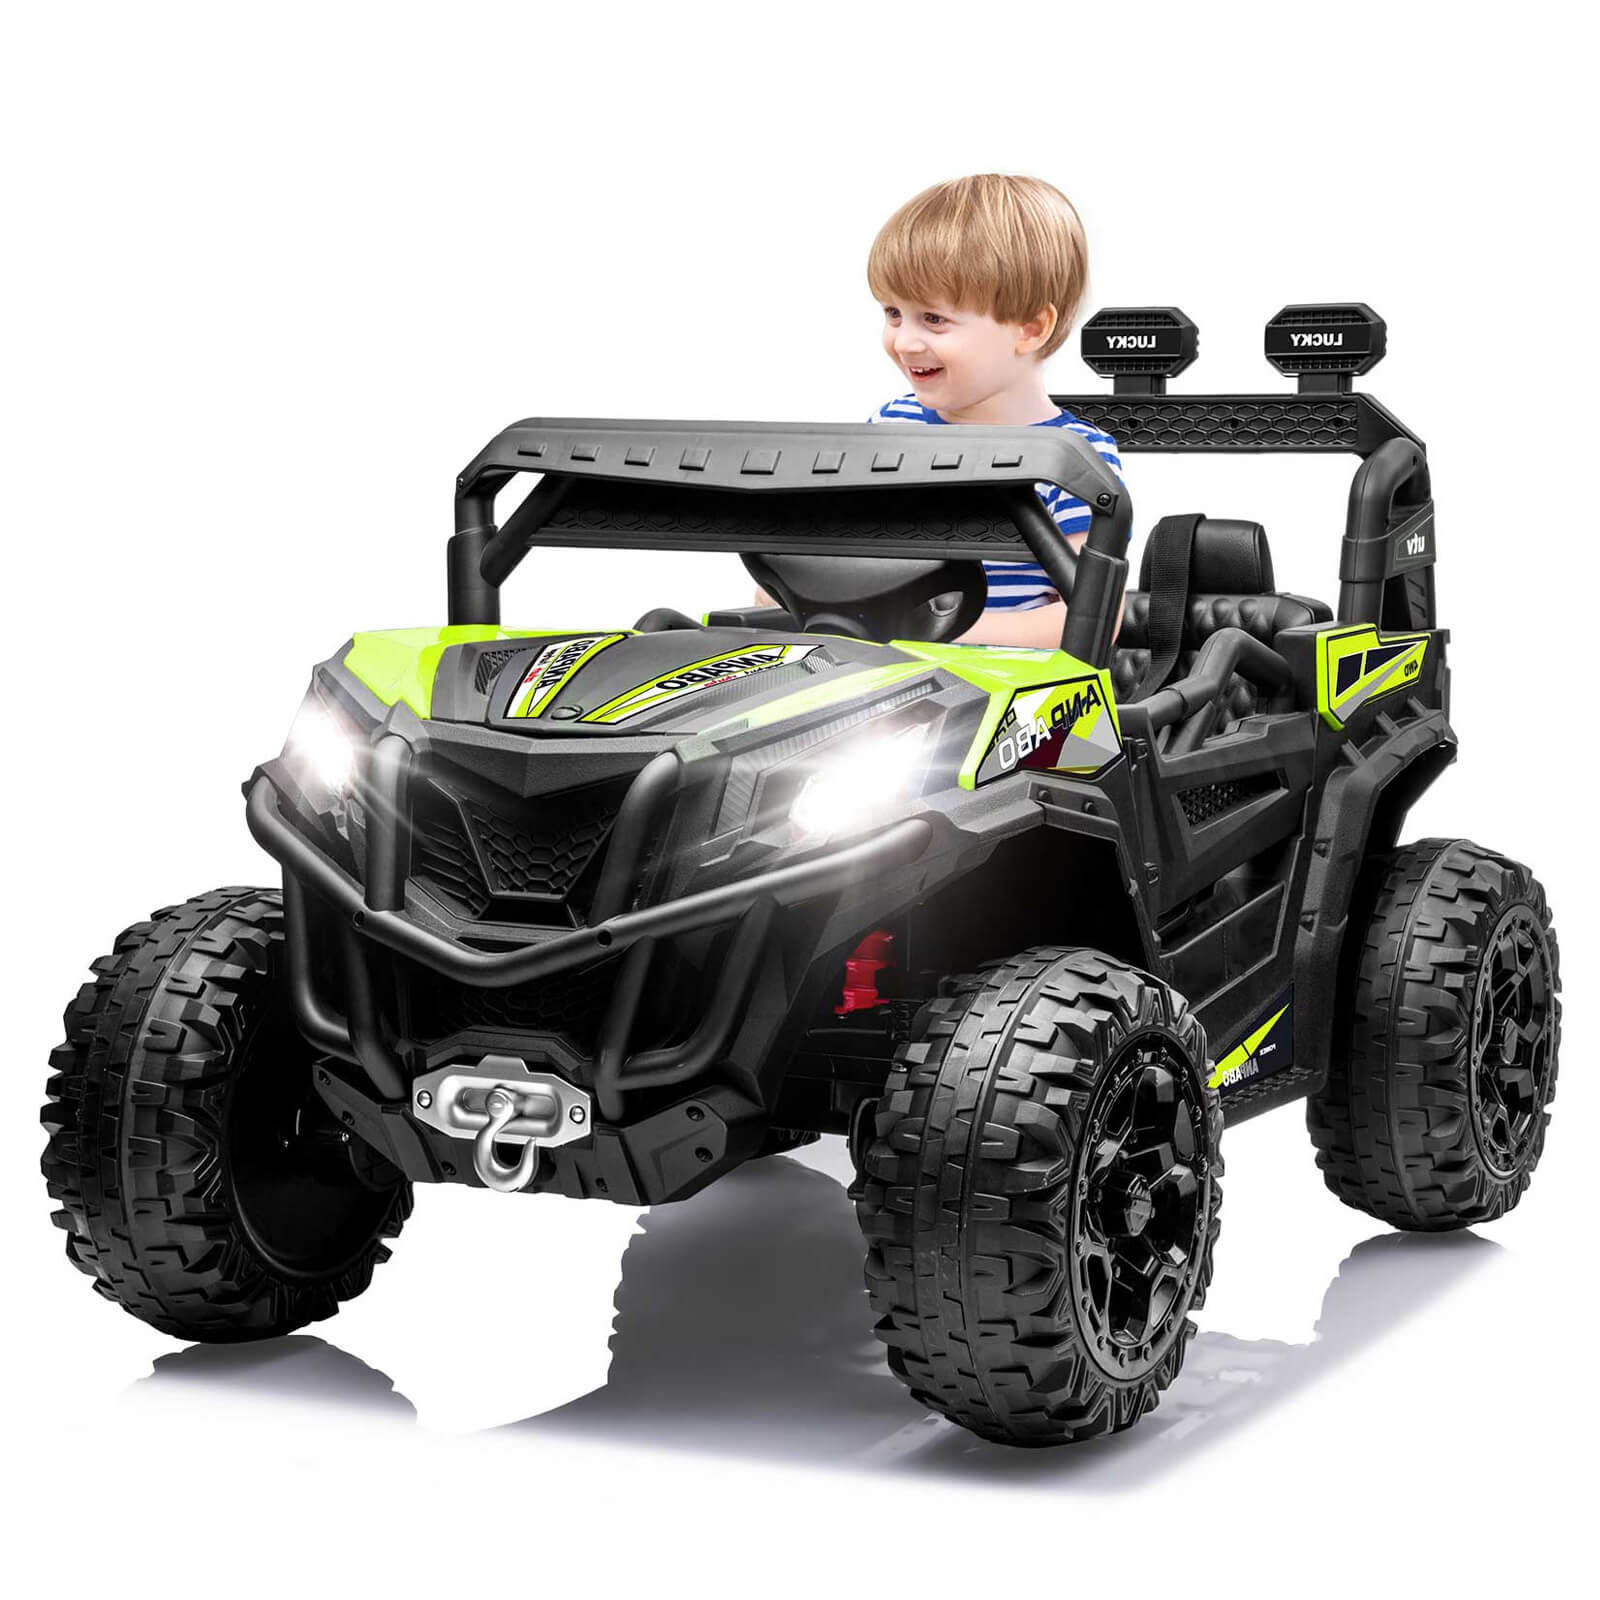 24v Ride On Toys Toy Cars For Kids